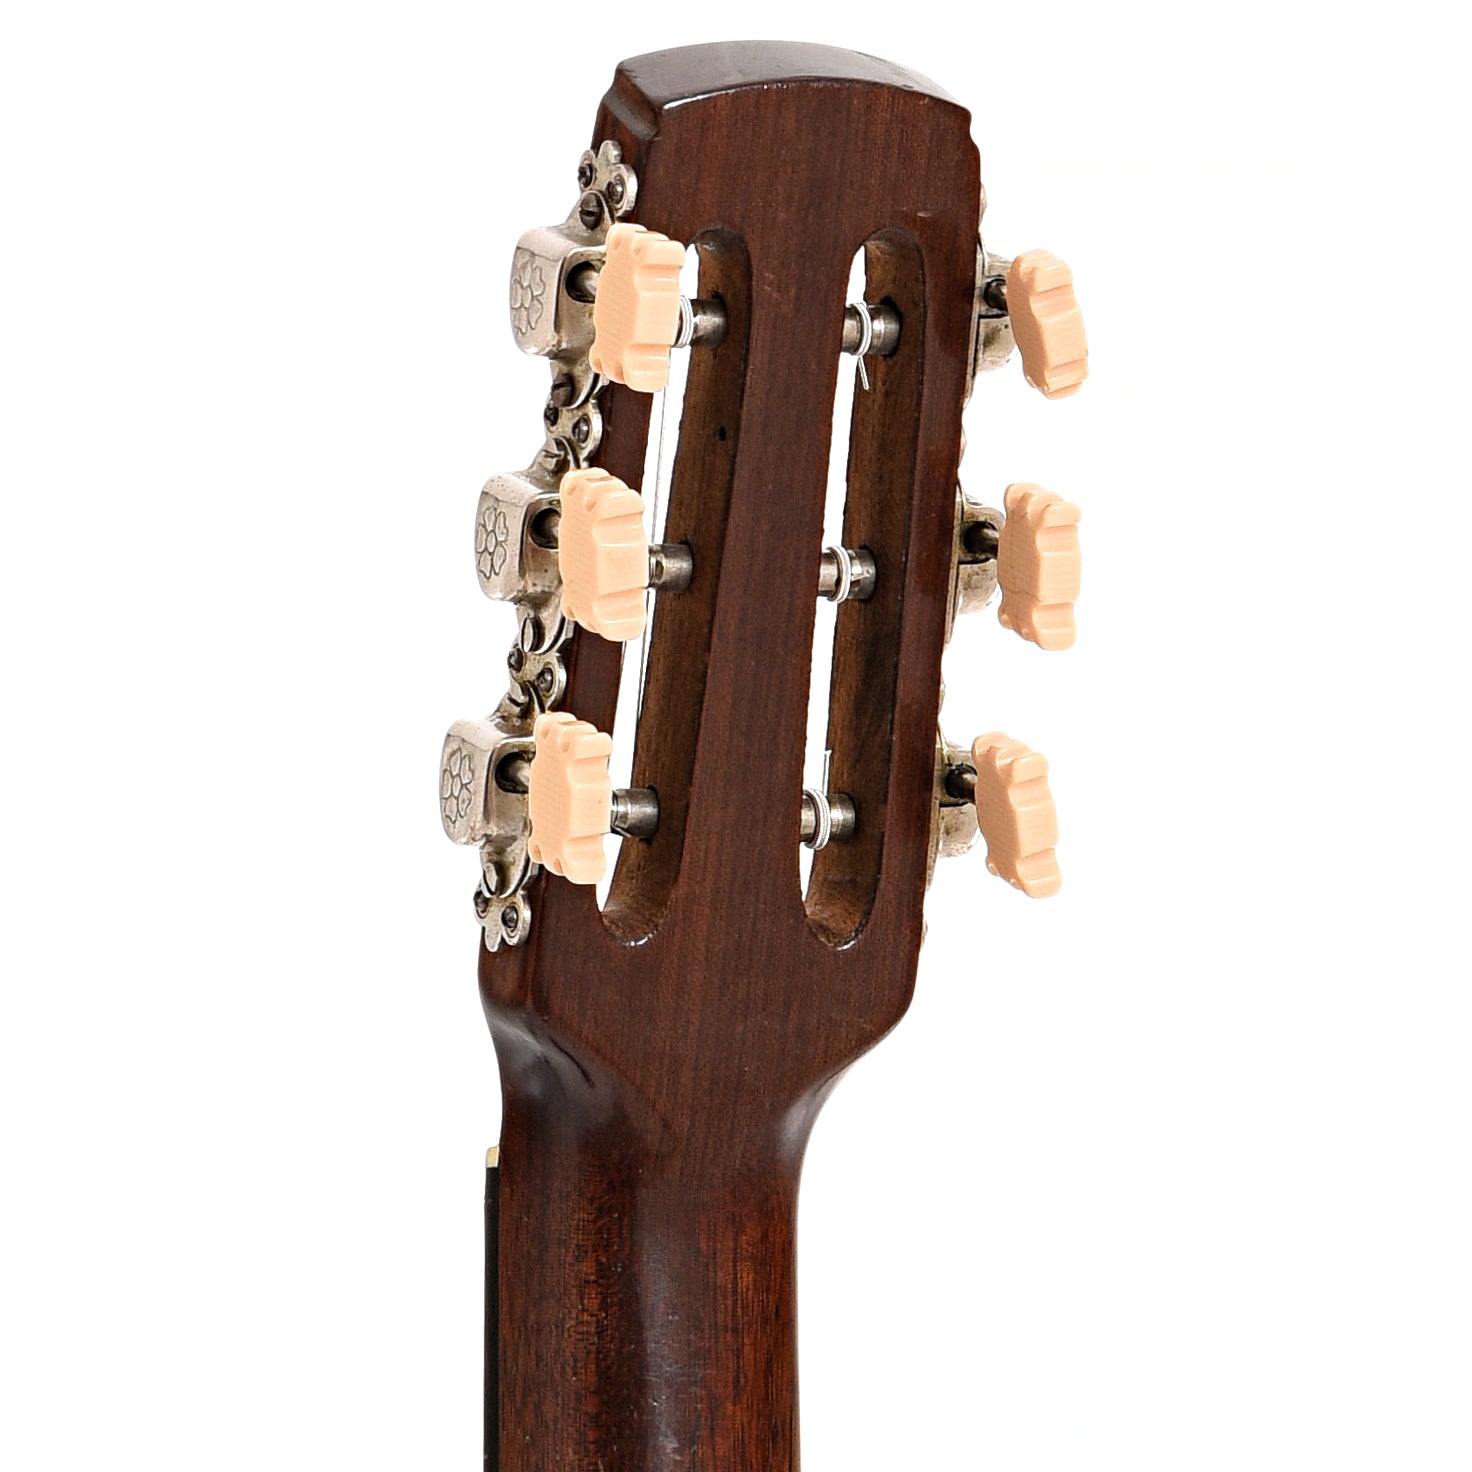 Back headstock of Carbonell 25